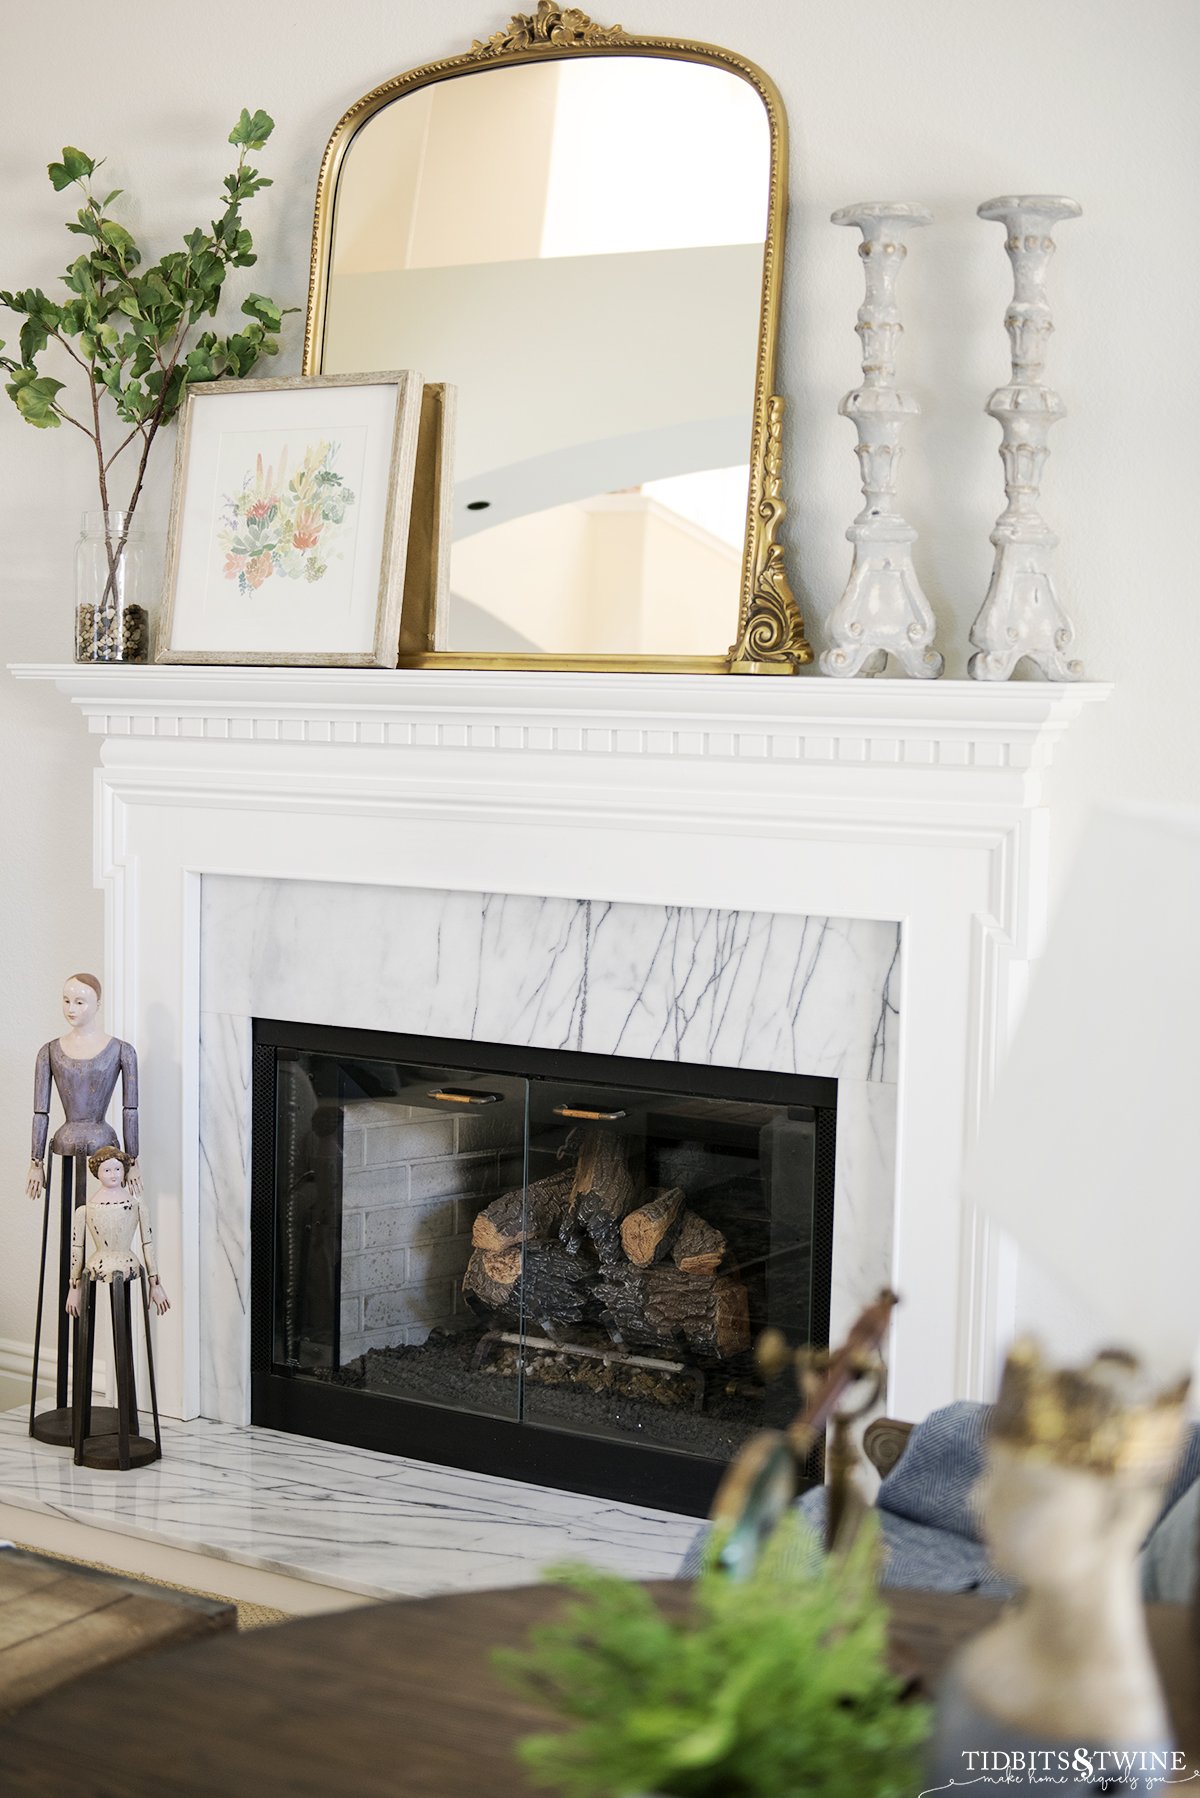 French fireplace mantel with gold mirror candlesticks and artwork on top with vase holding fake ginkgo stems